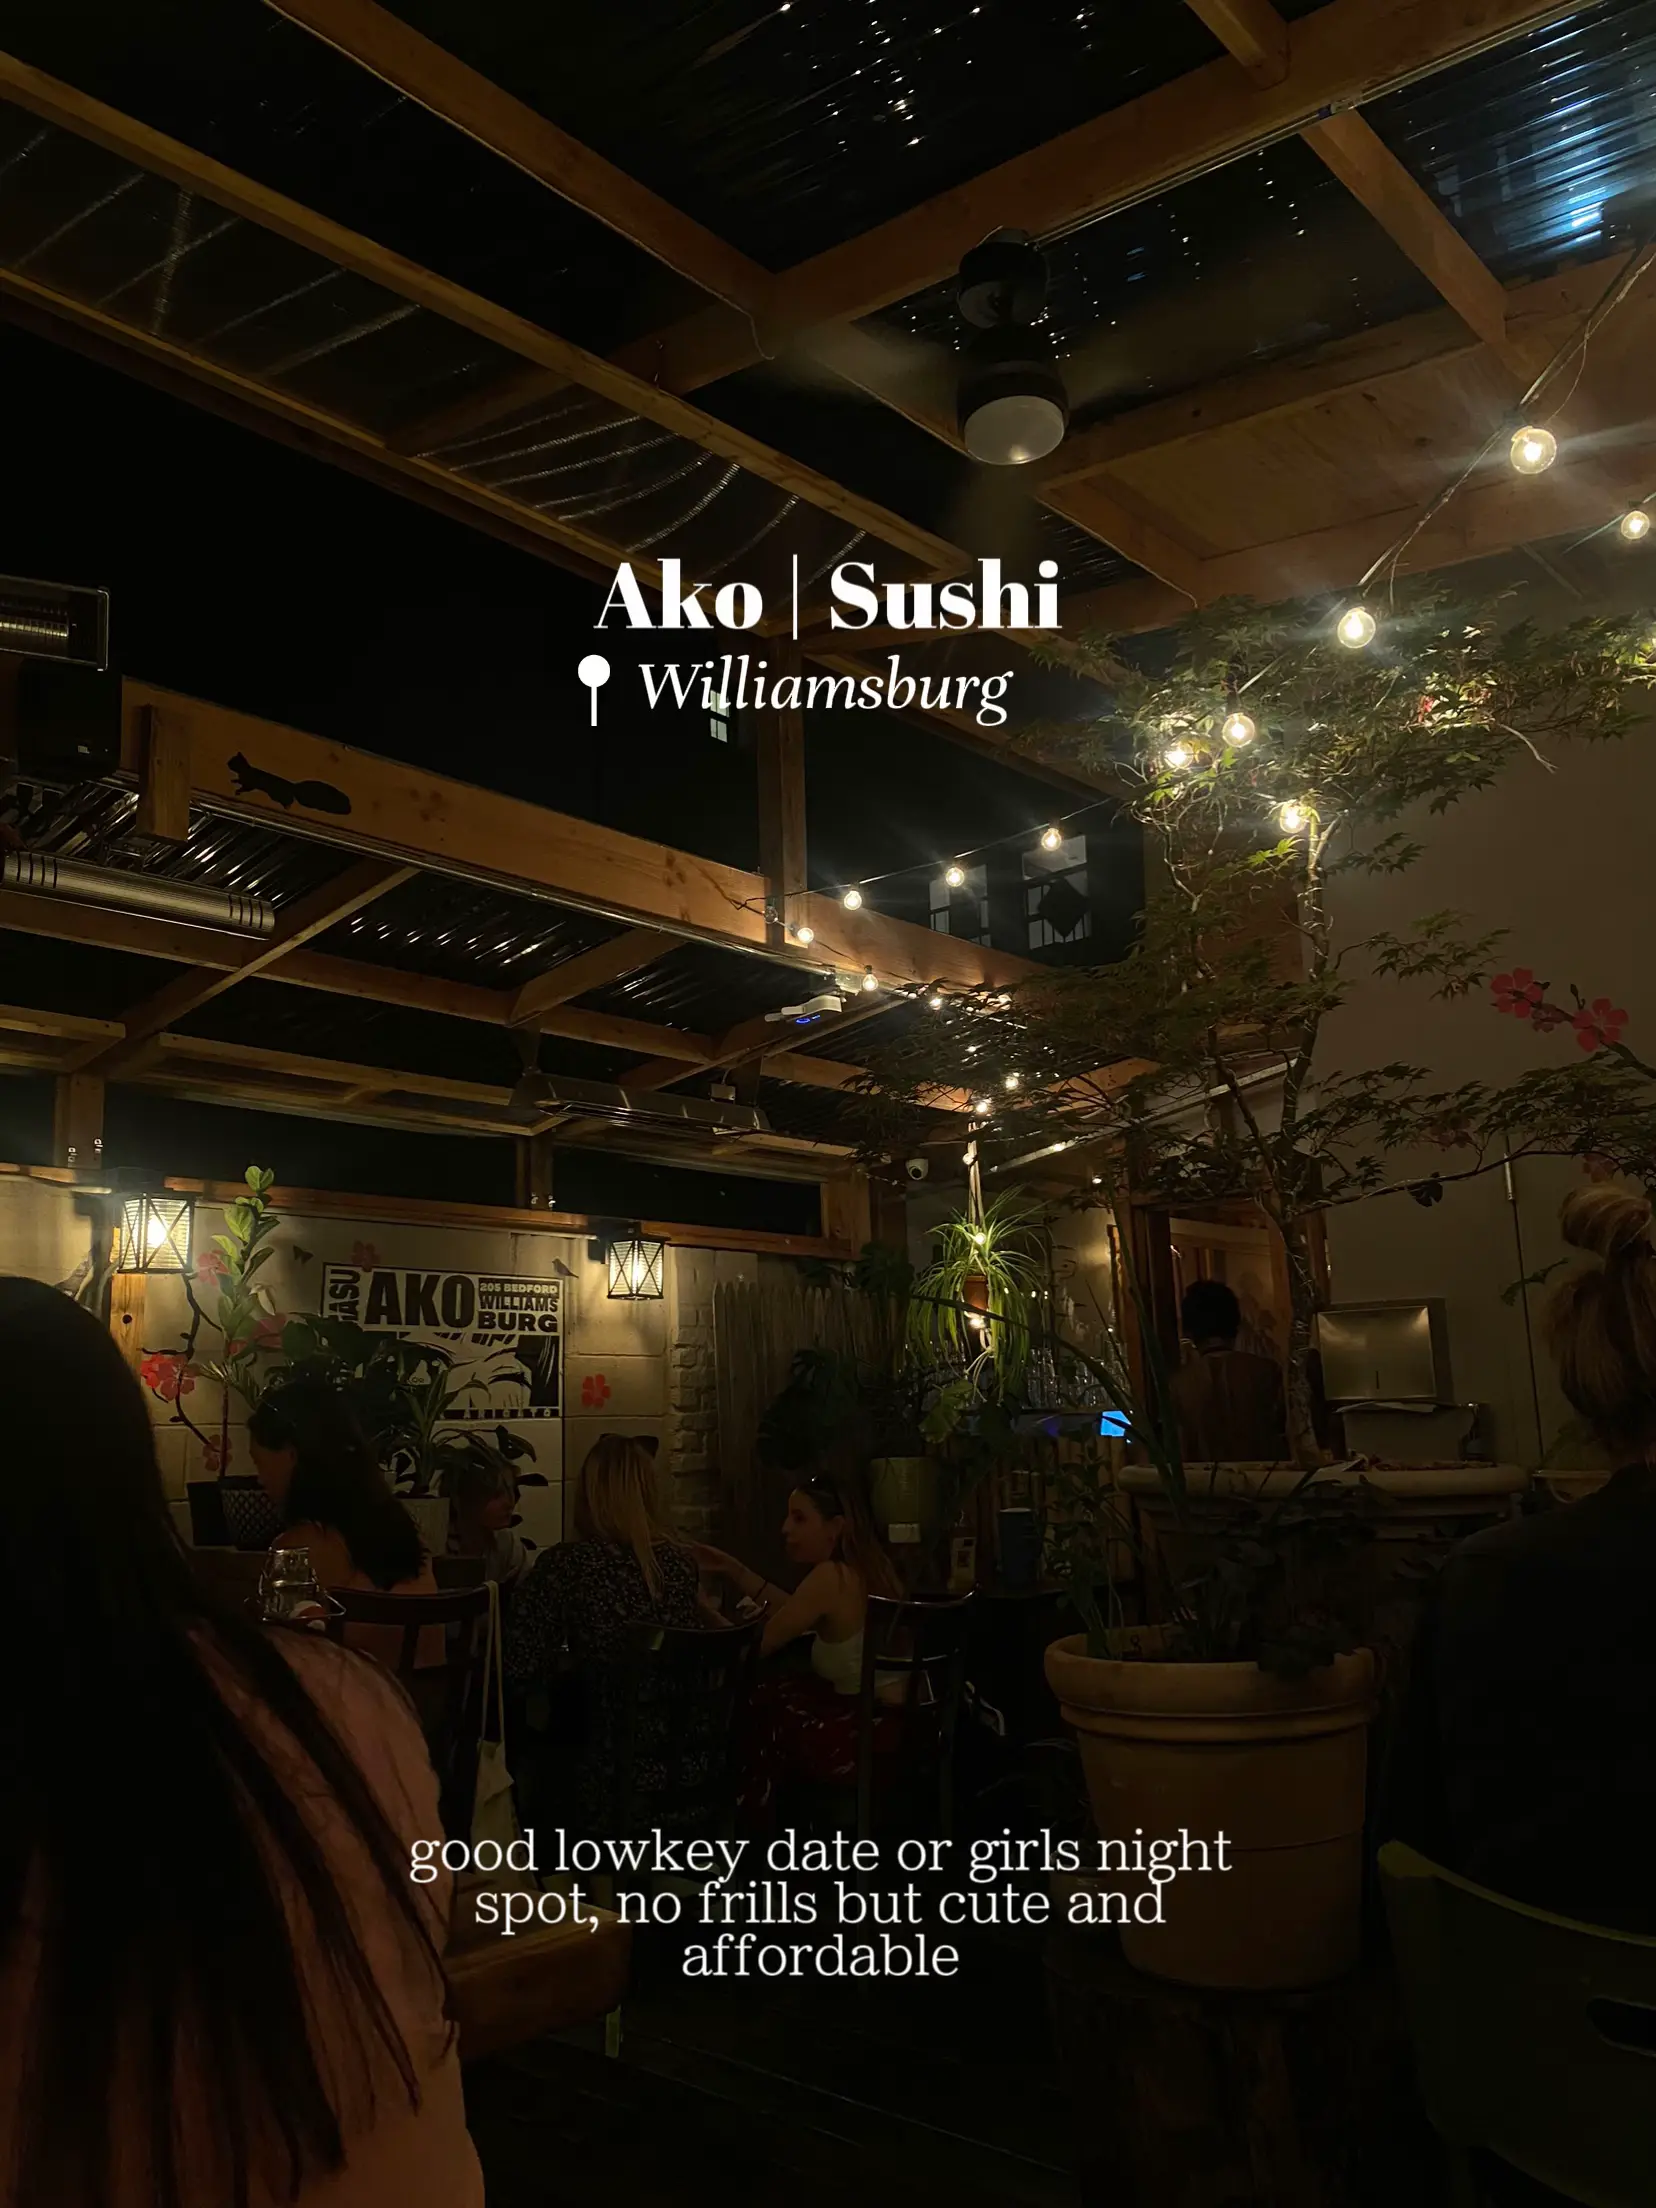  A restaurant with a sushi menu and a woman sitting at a table.